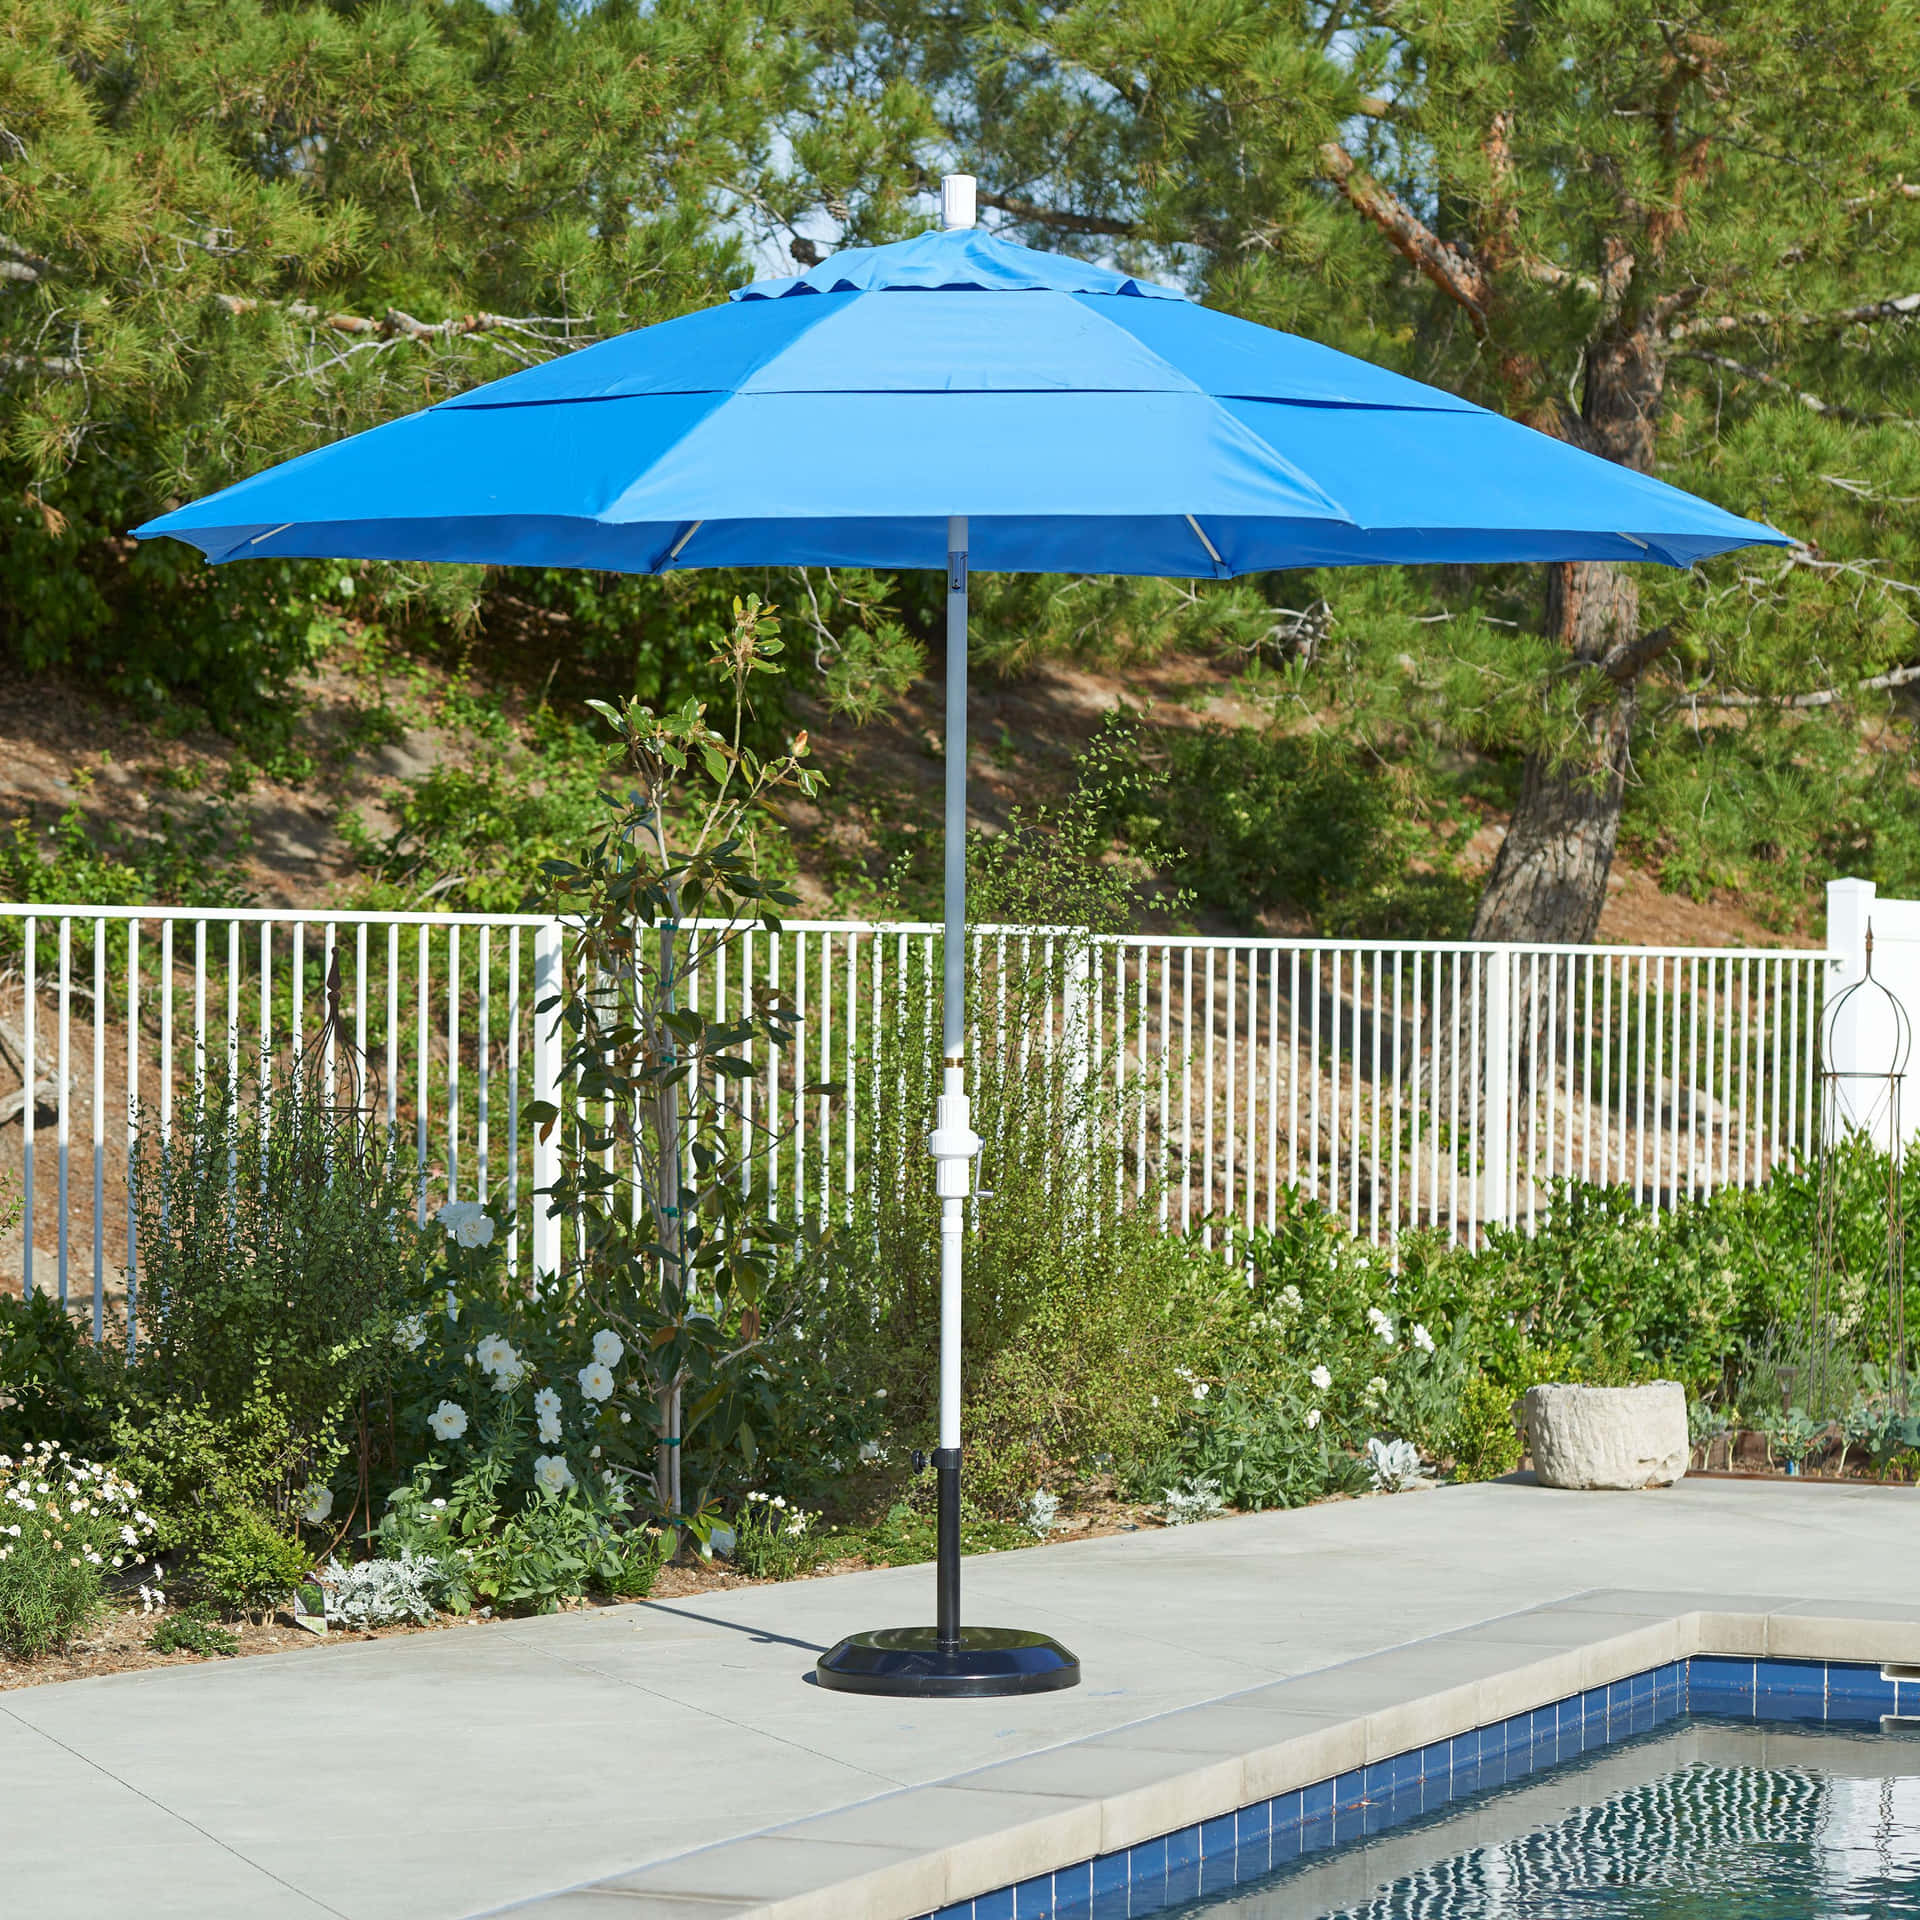 Keep dry and stylish with this classic blue umbrella !